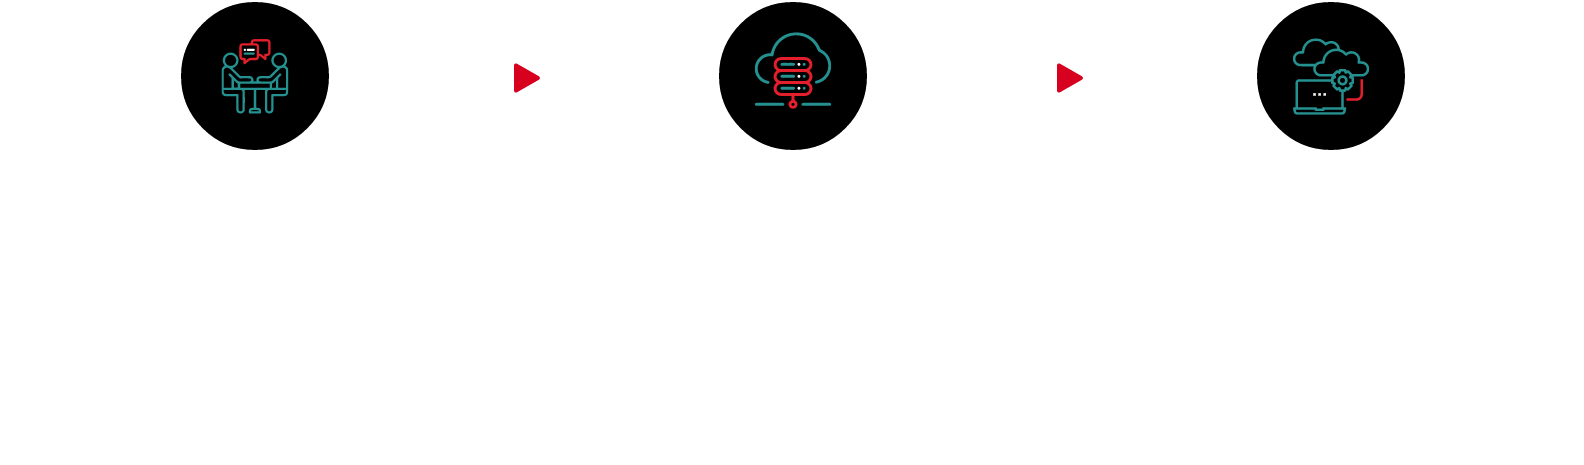 Dotcom Software Solutions Offerings